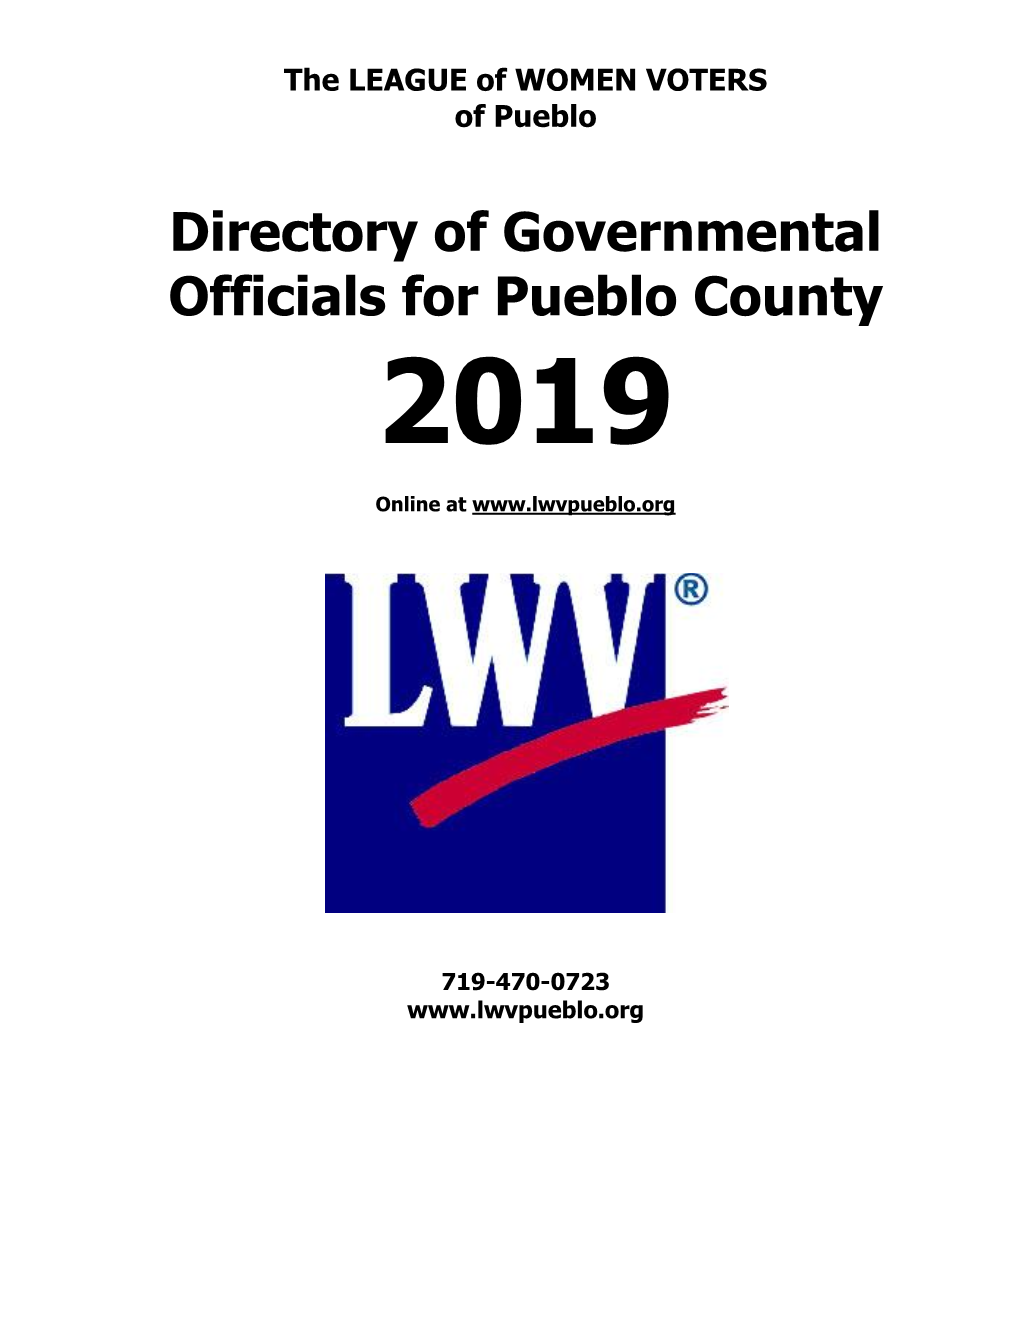 Directory of Governmental Officials for Pueblo County 2019